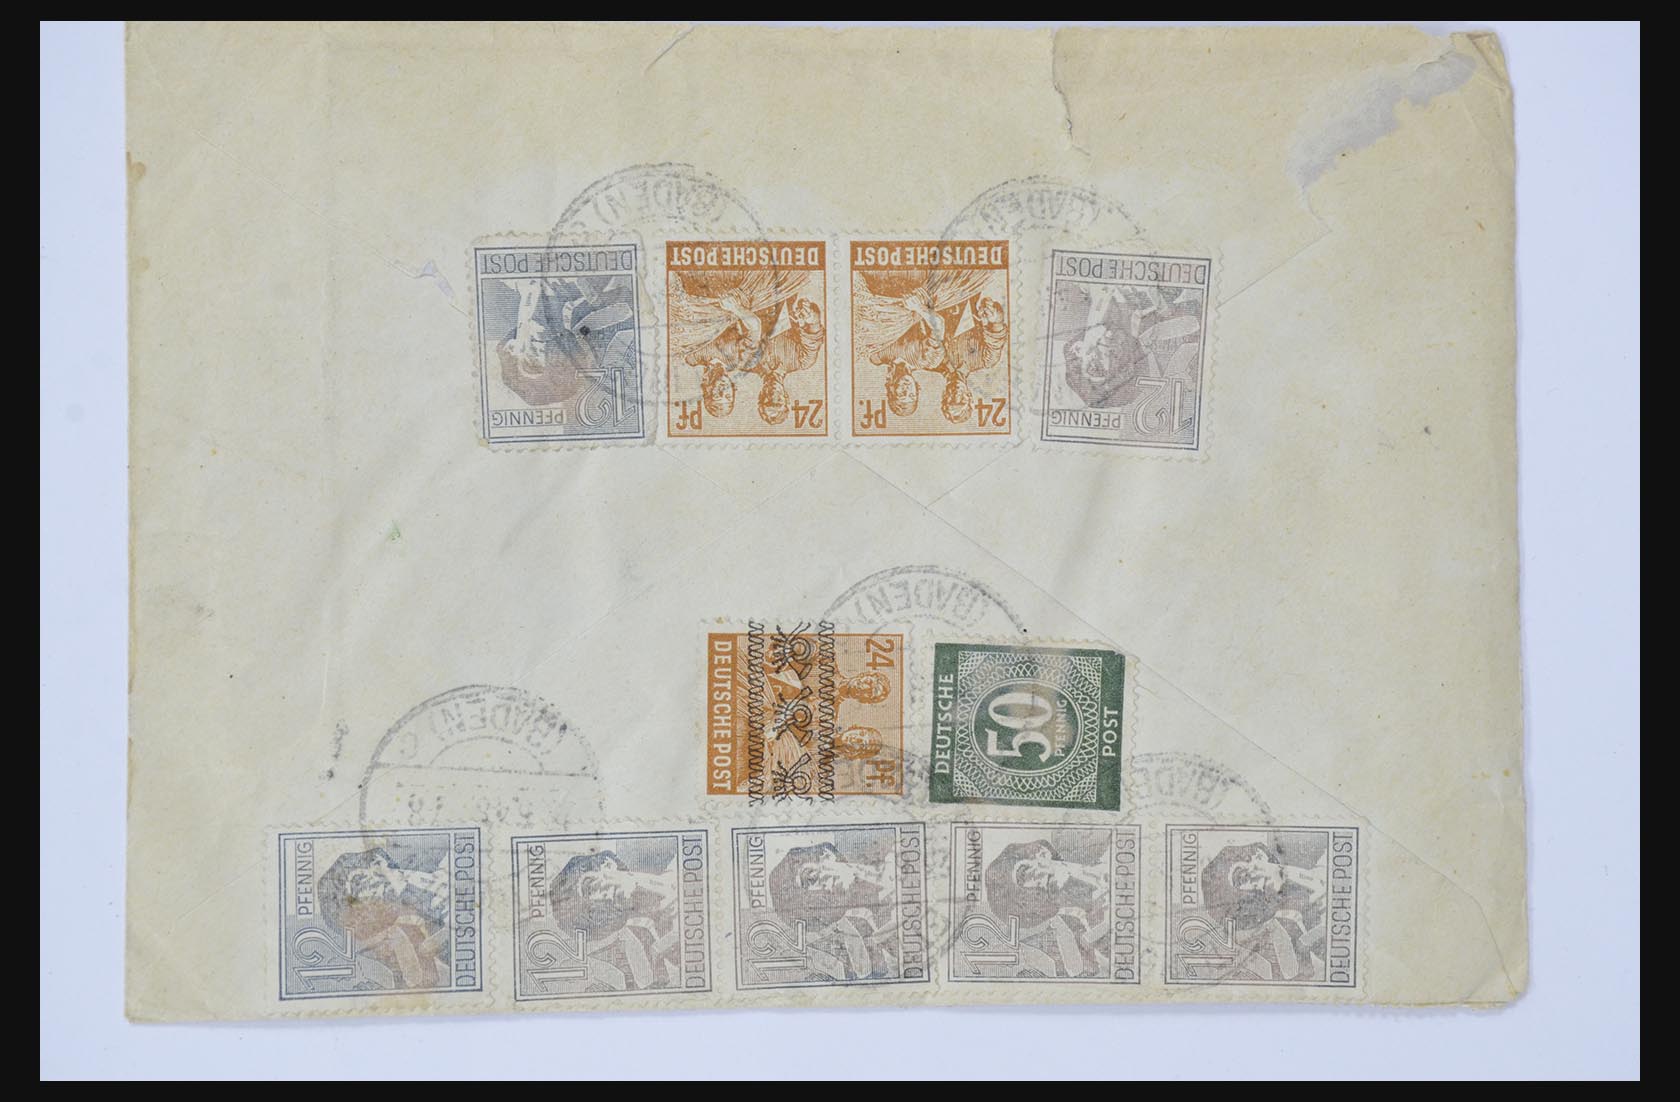 31581 037 - 31581 Germany covers and FDC's 1945-1981.